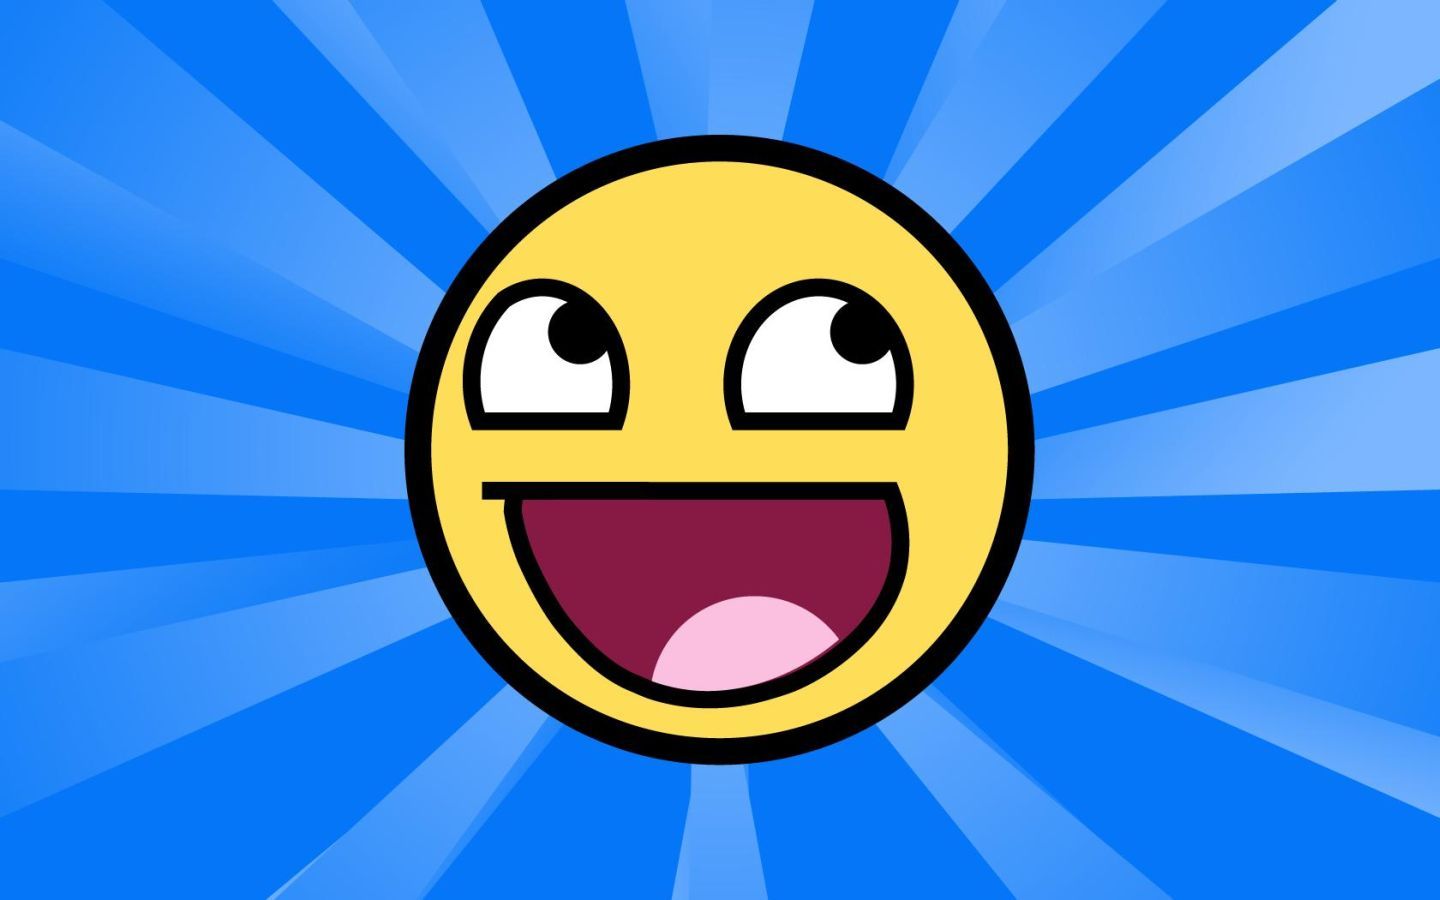 Wallpaper Smiley Animation images